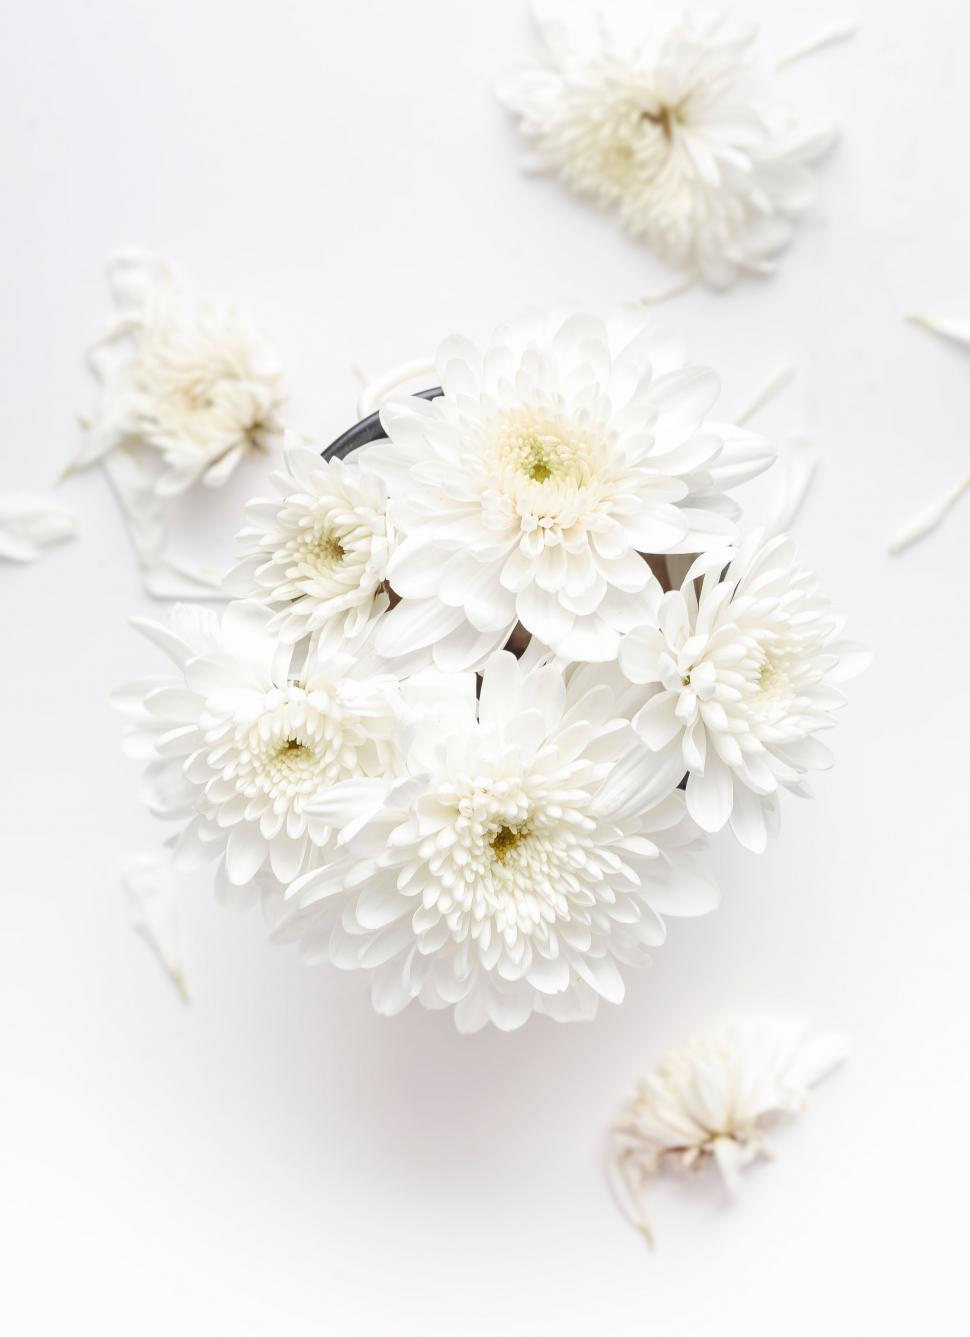 Free Image of Cluster of White Flowers on White Surface 